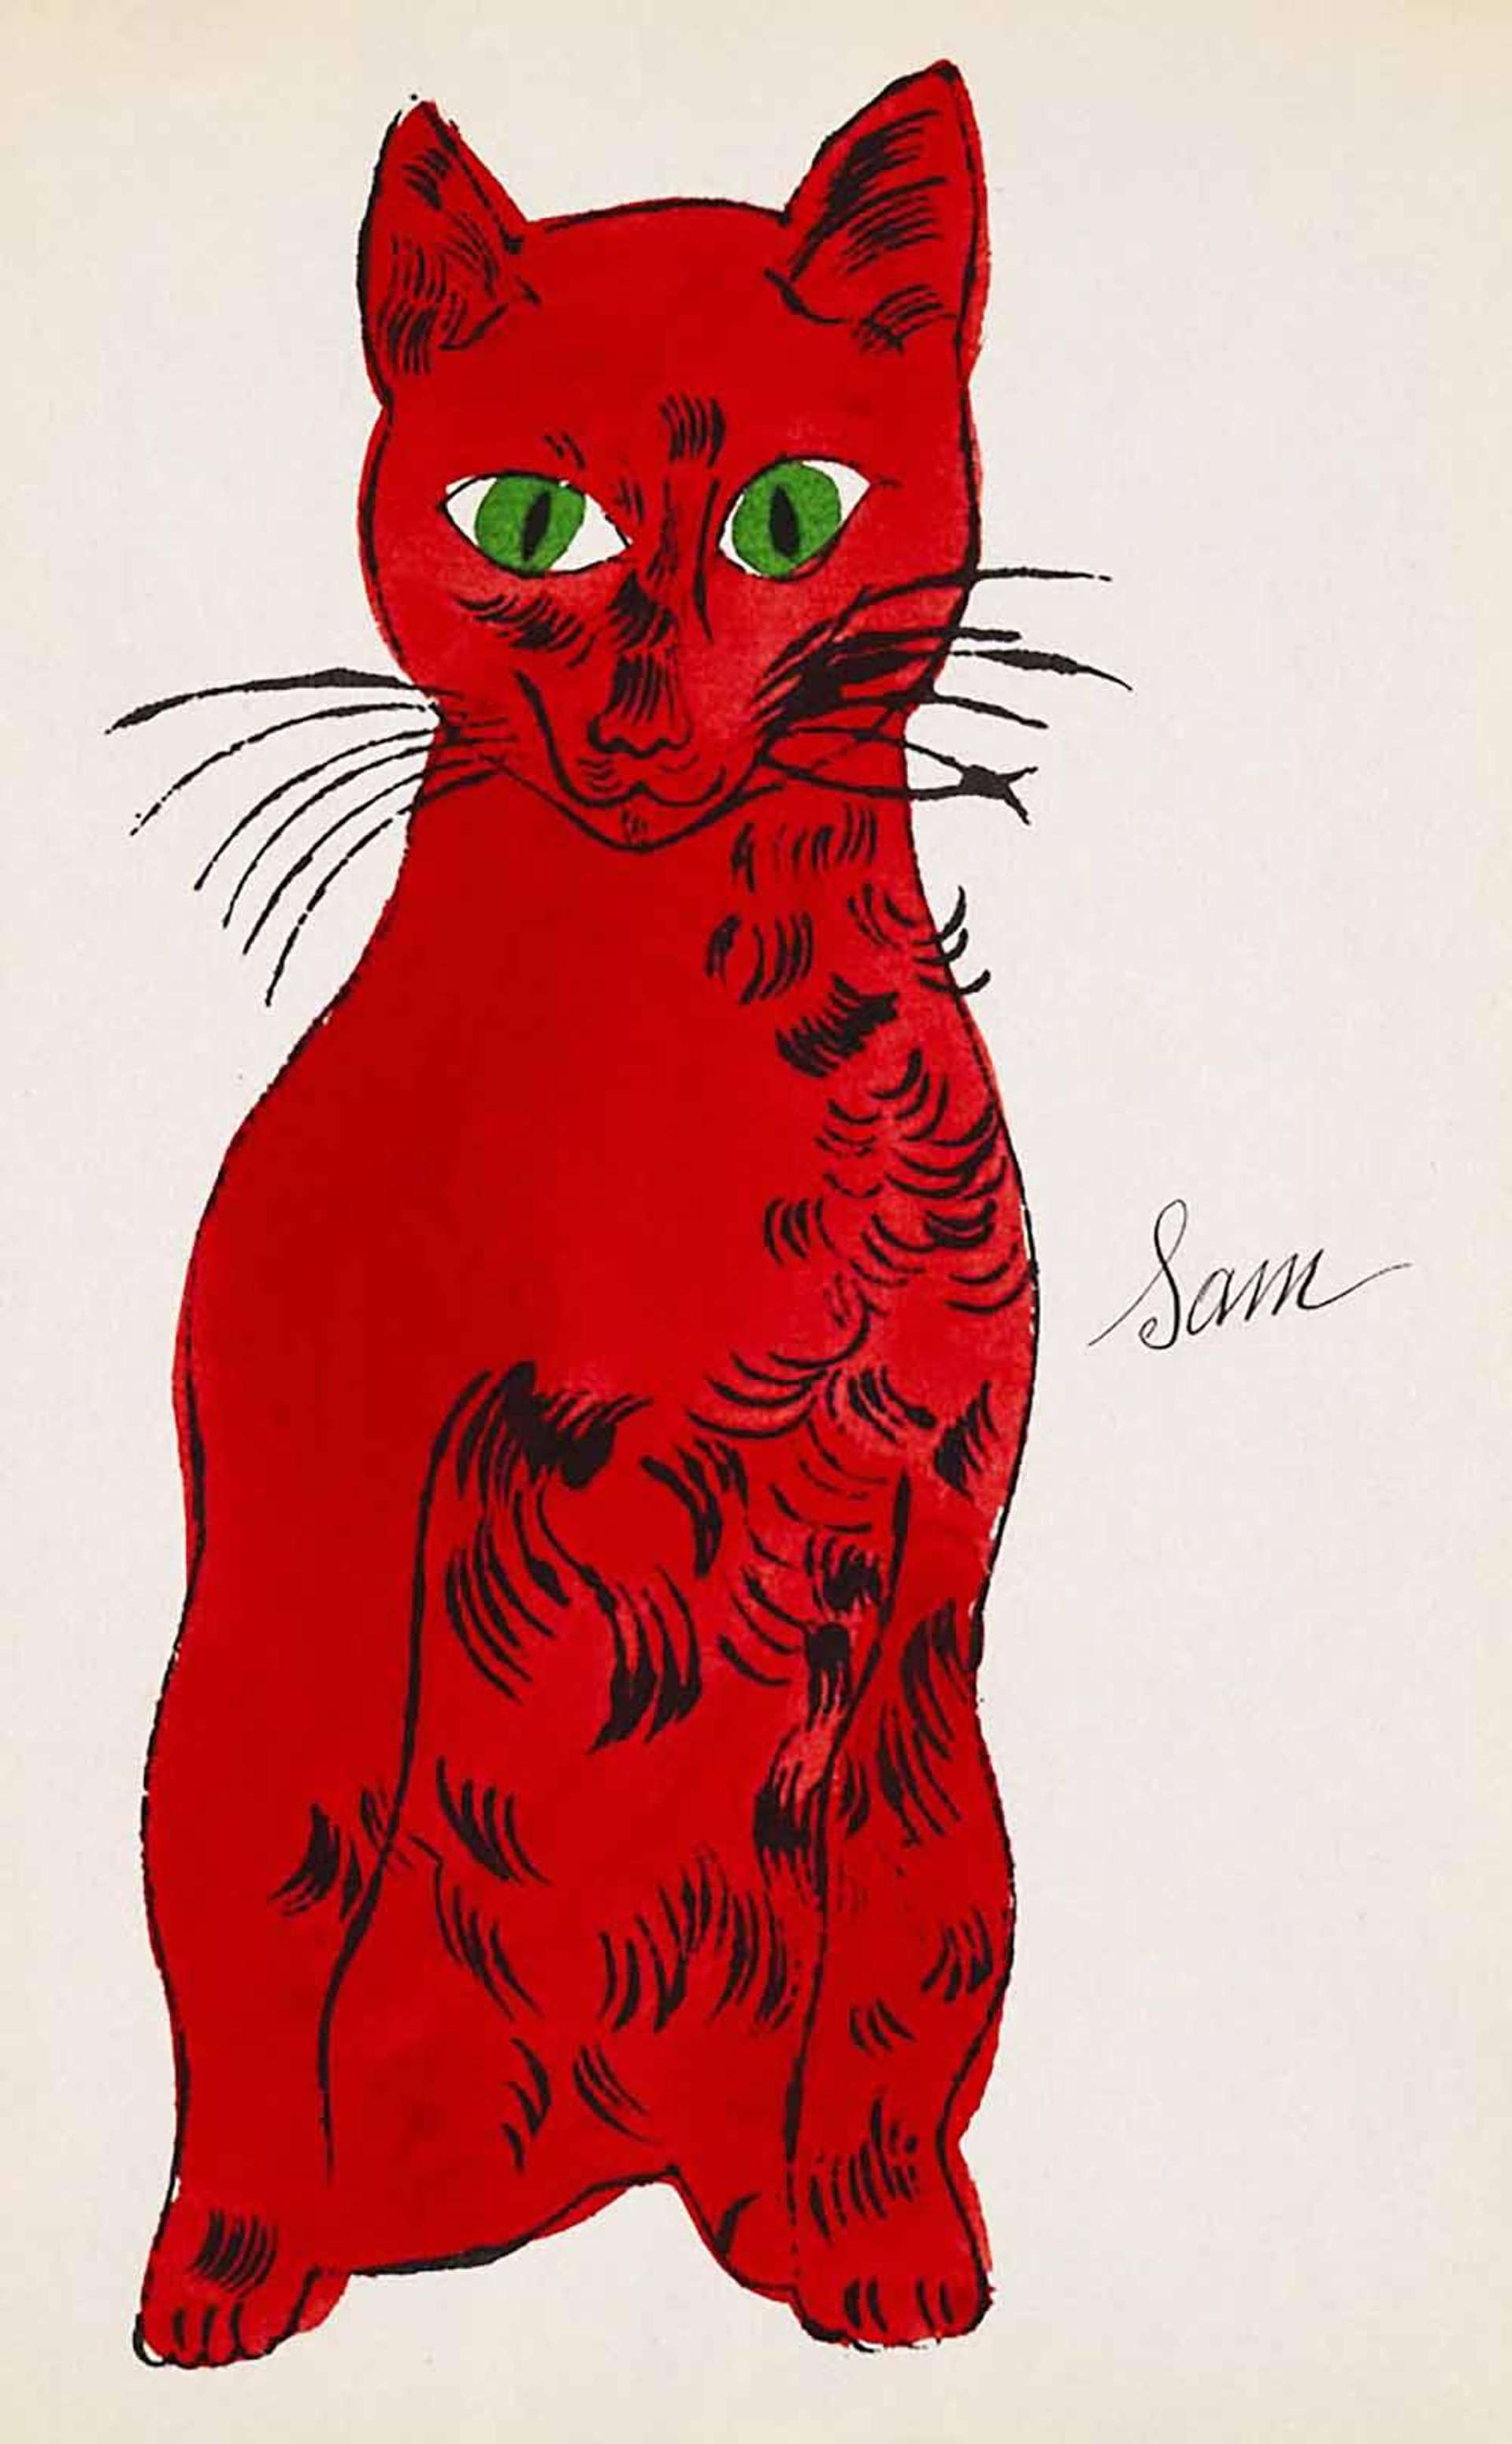 Cats Named Sam IV 53 by Andy Warhol